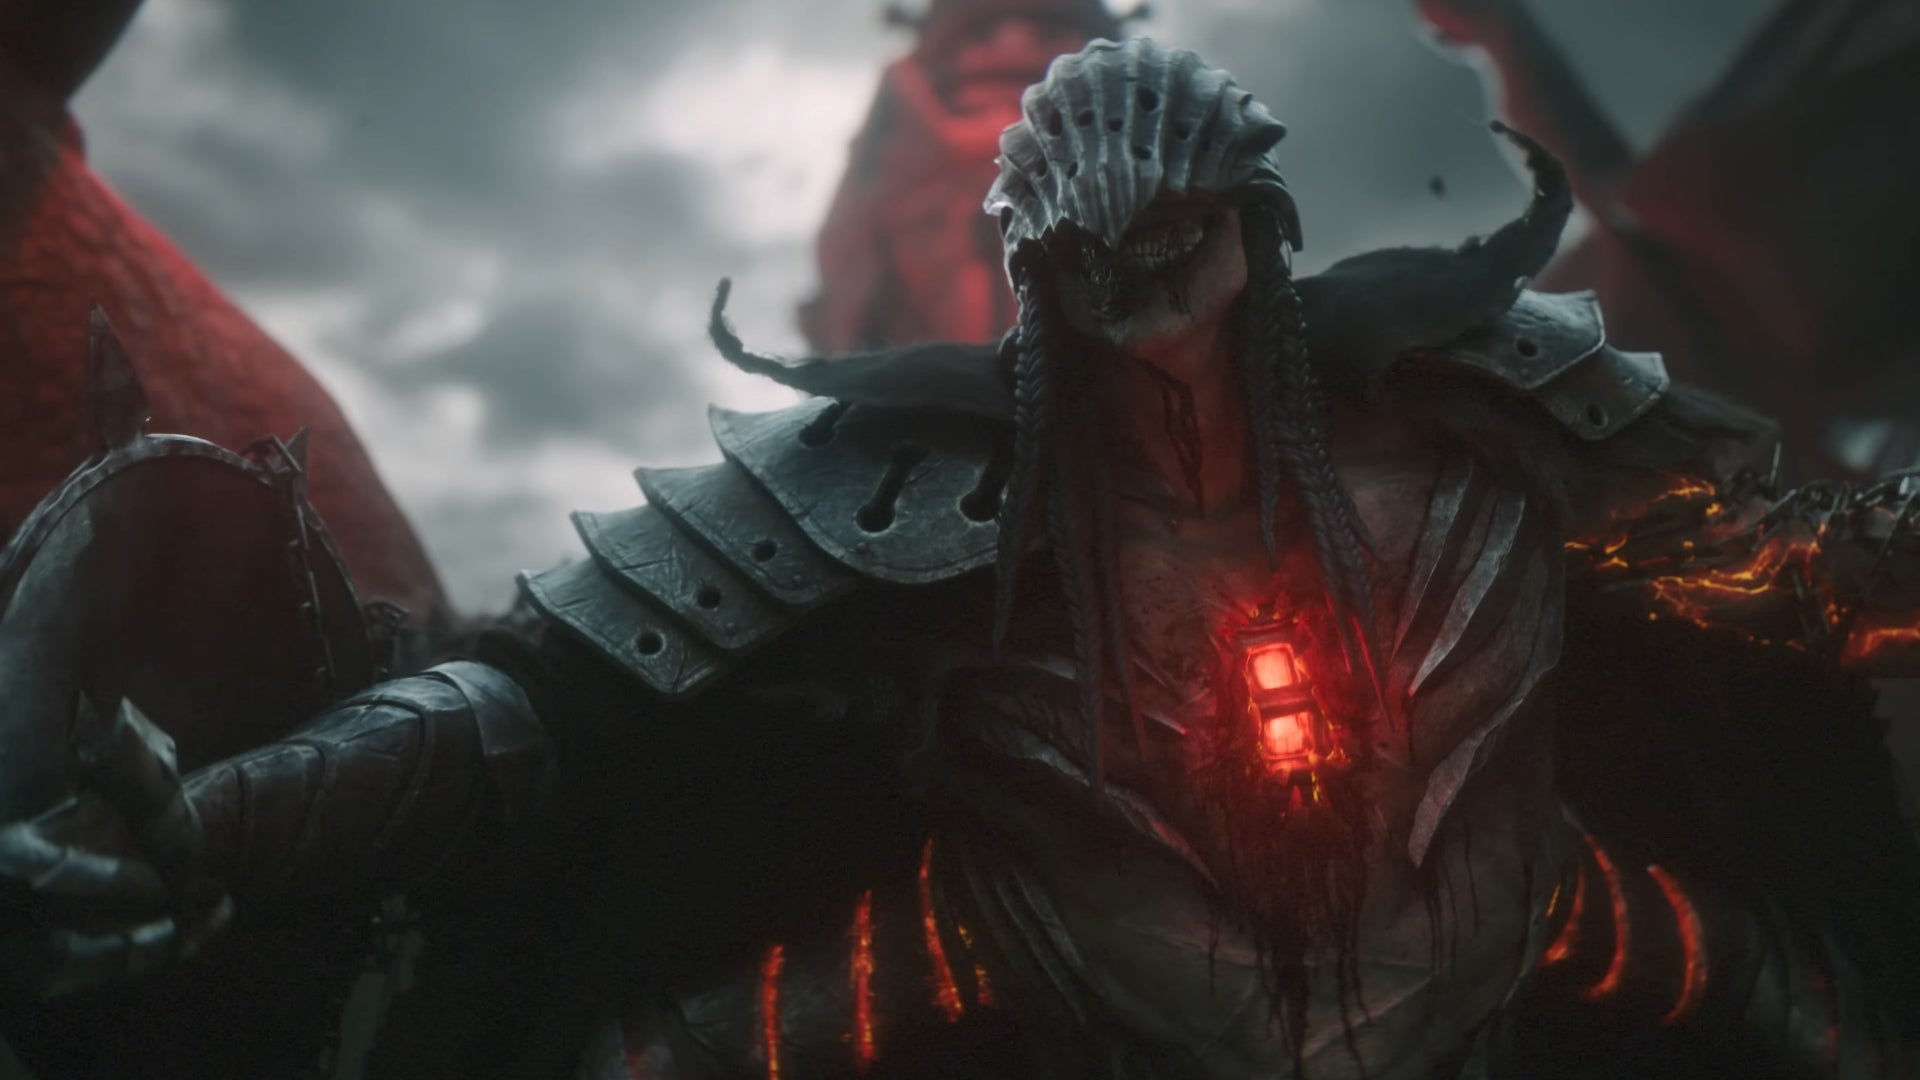 An undead enemy rears up in front of the camera and grins in The Lords Of The Fallen announcement trailer cinematic.